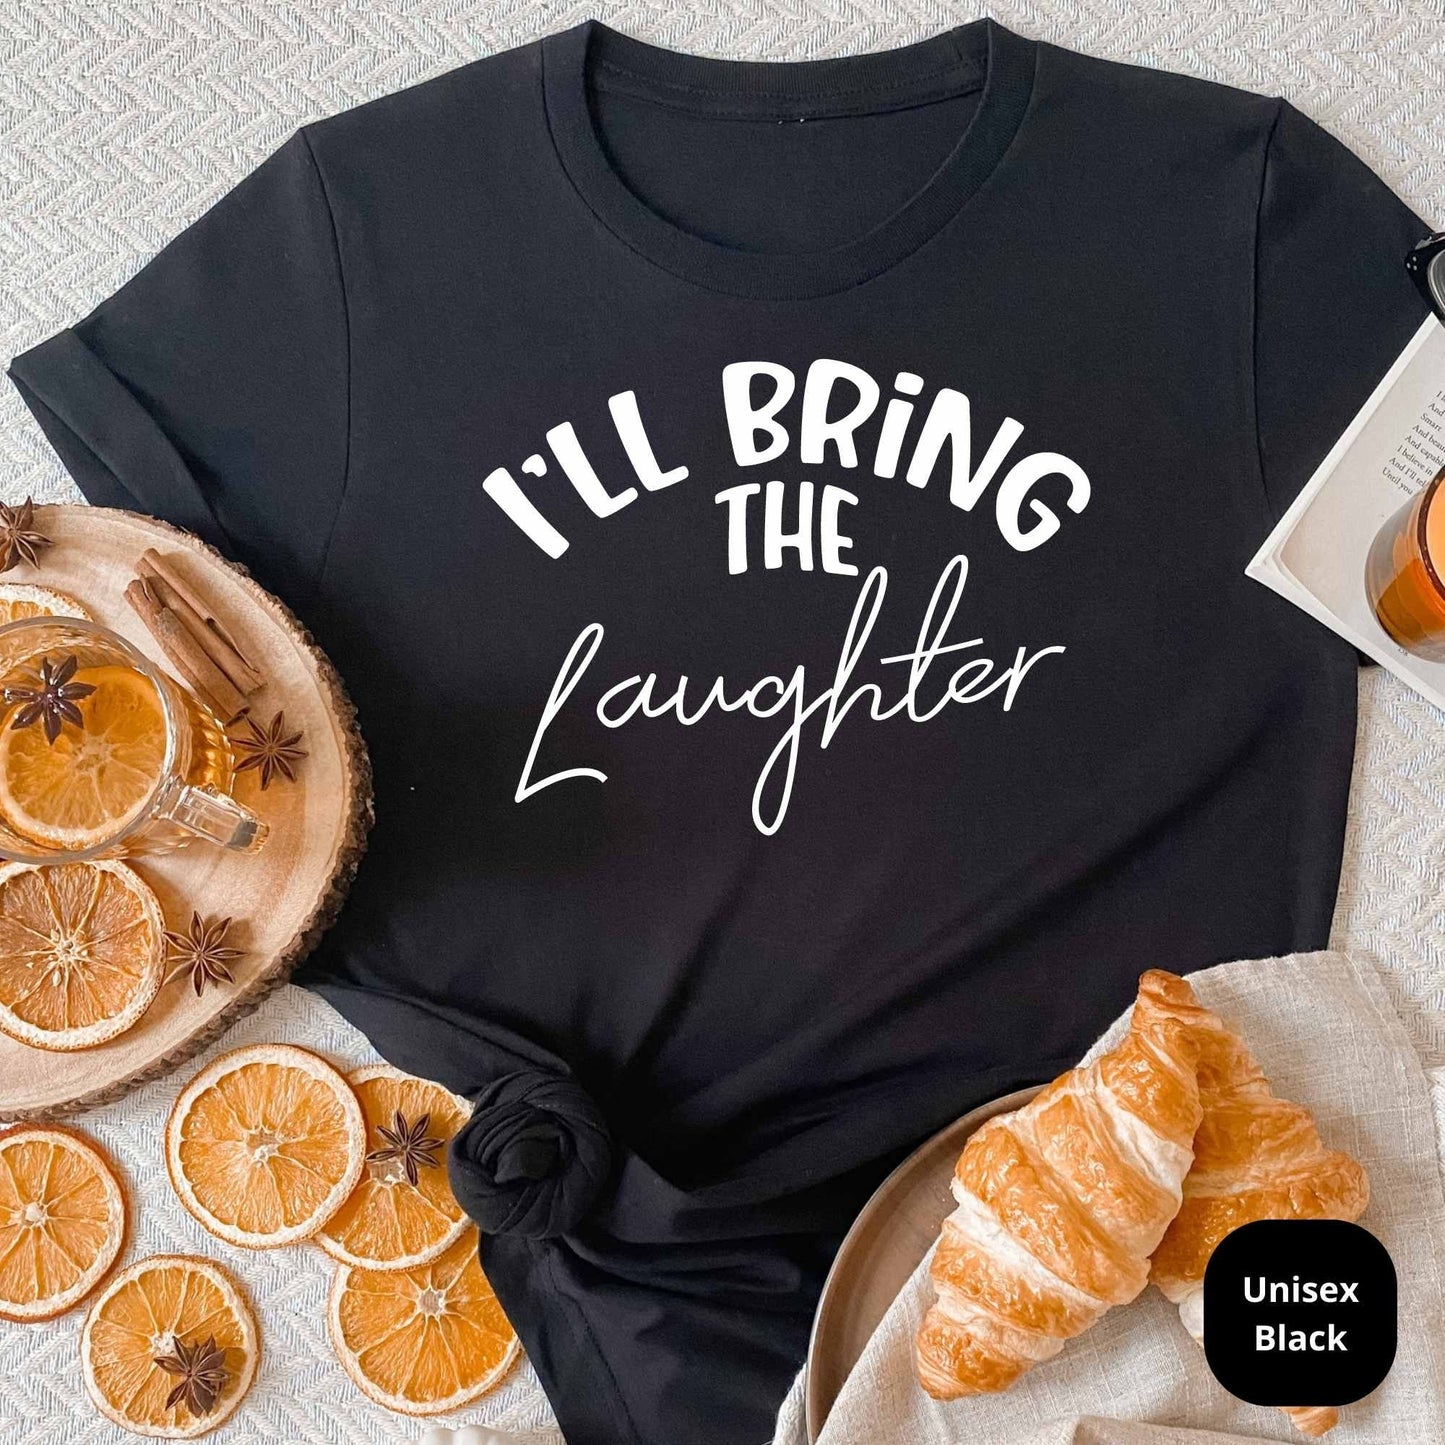 40th Birthday Shirts, I'll Bring The.. | Funny 40th Birthday Gifts for Party